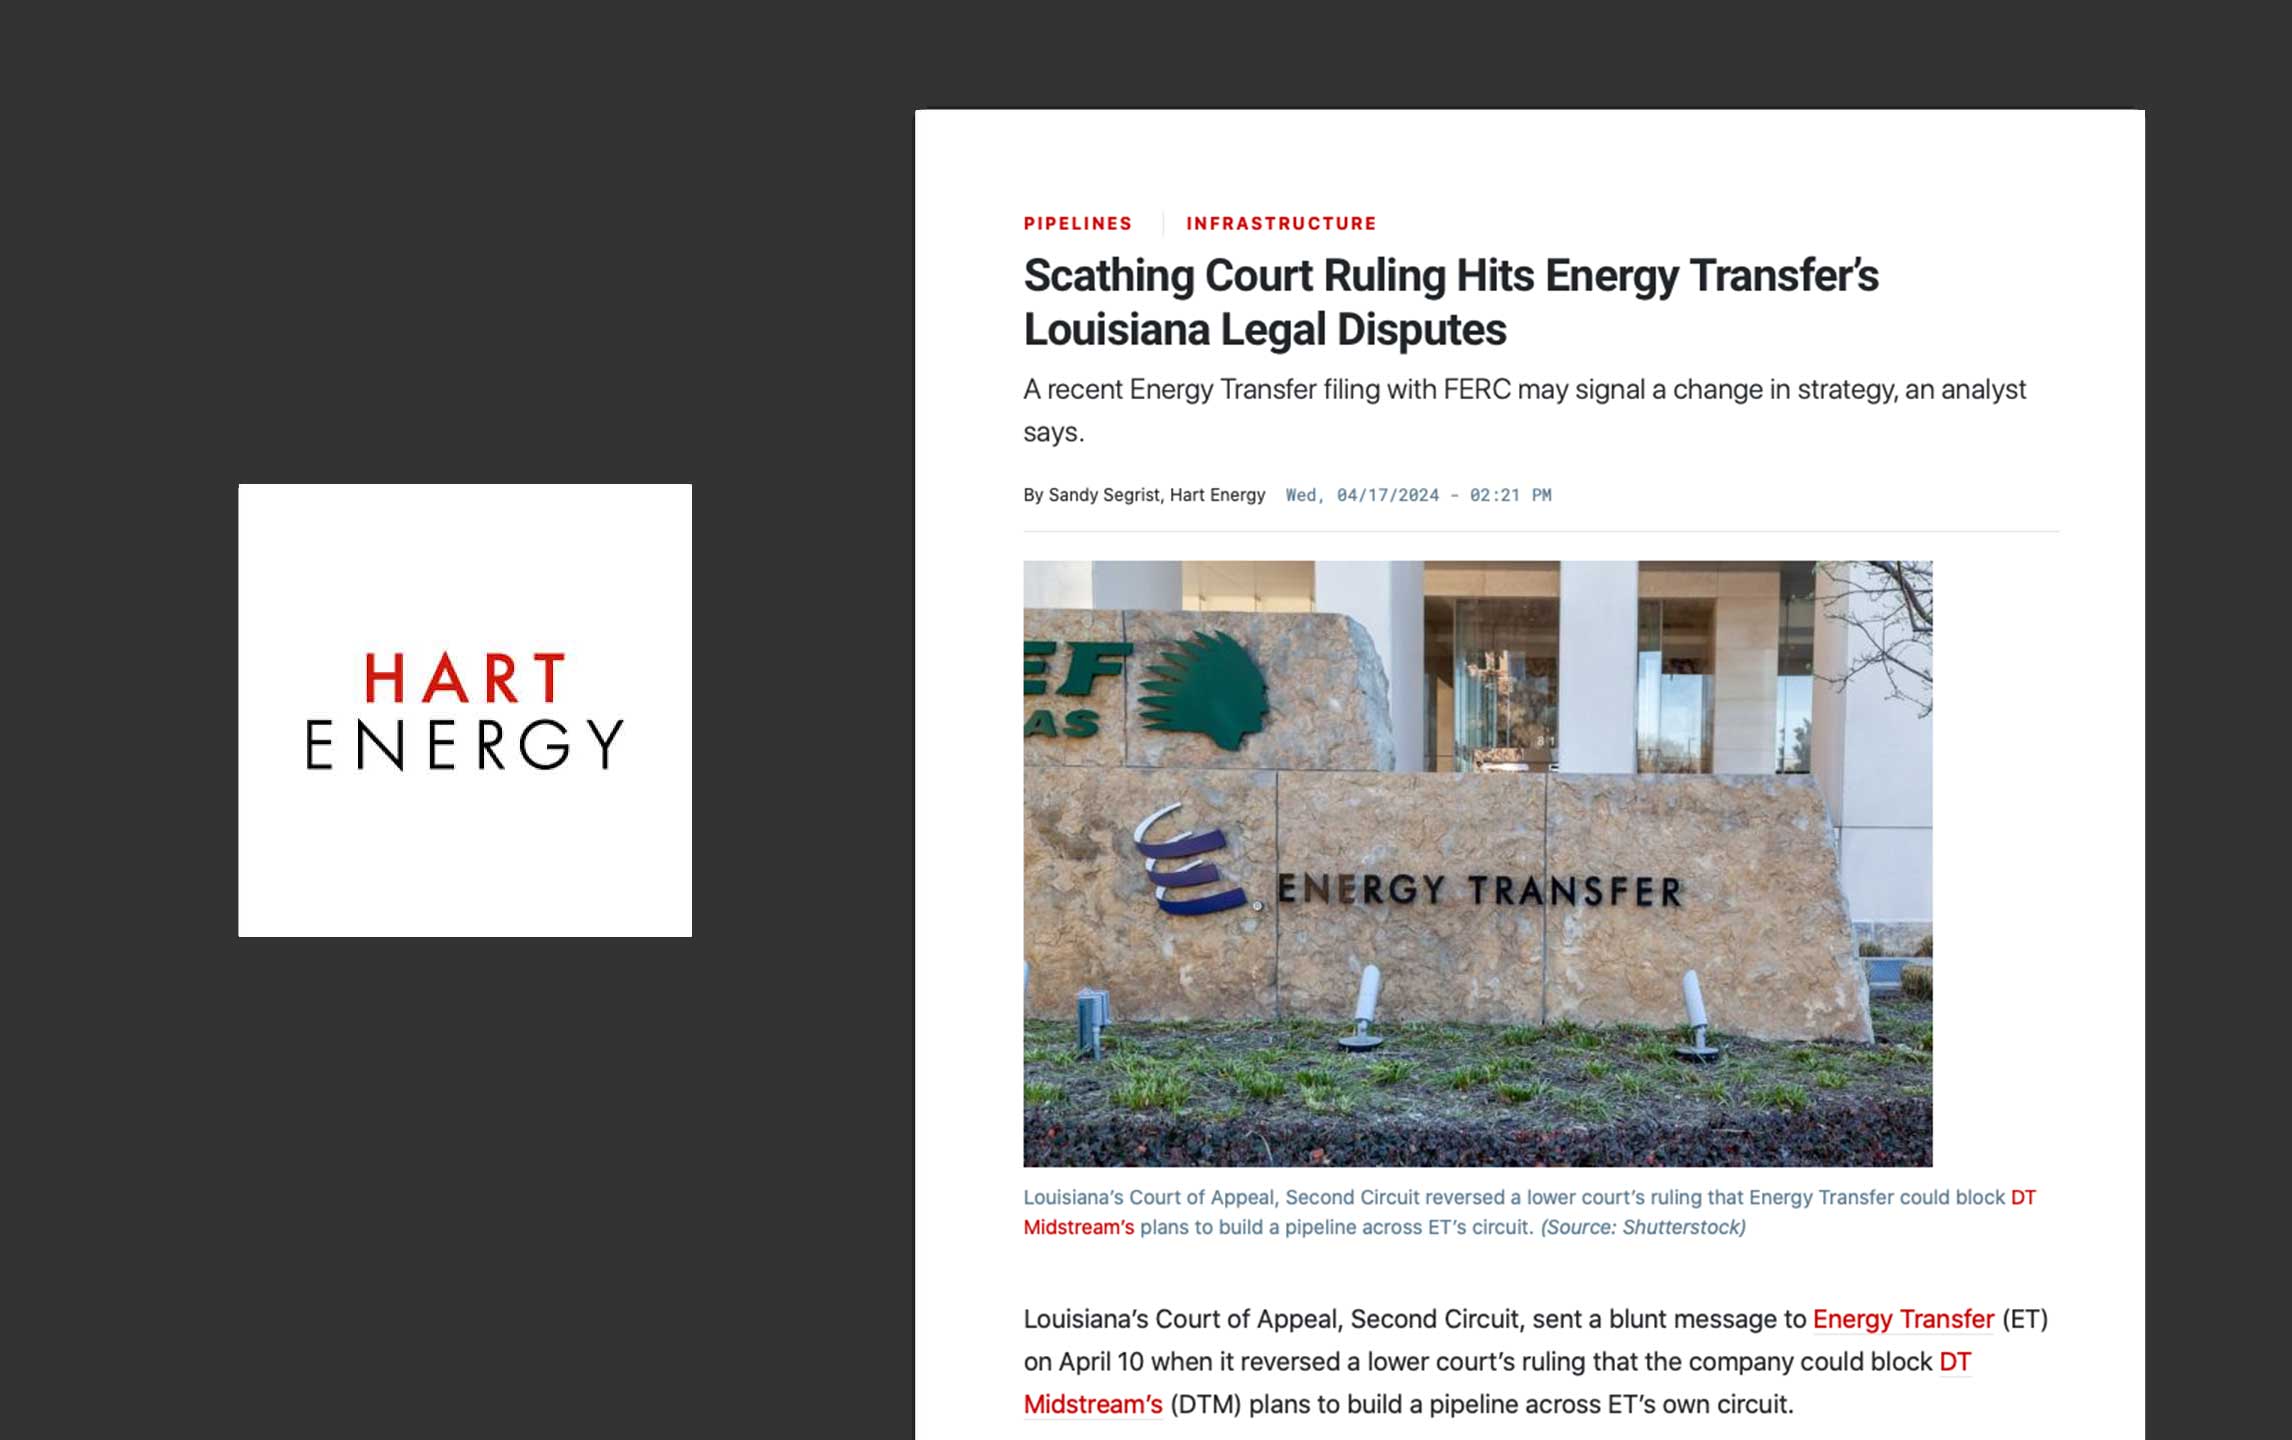 https://www.goarbo.com/press/scathing-court-ruling-hits-energy-transfer-louisiana-legal-disputes